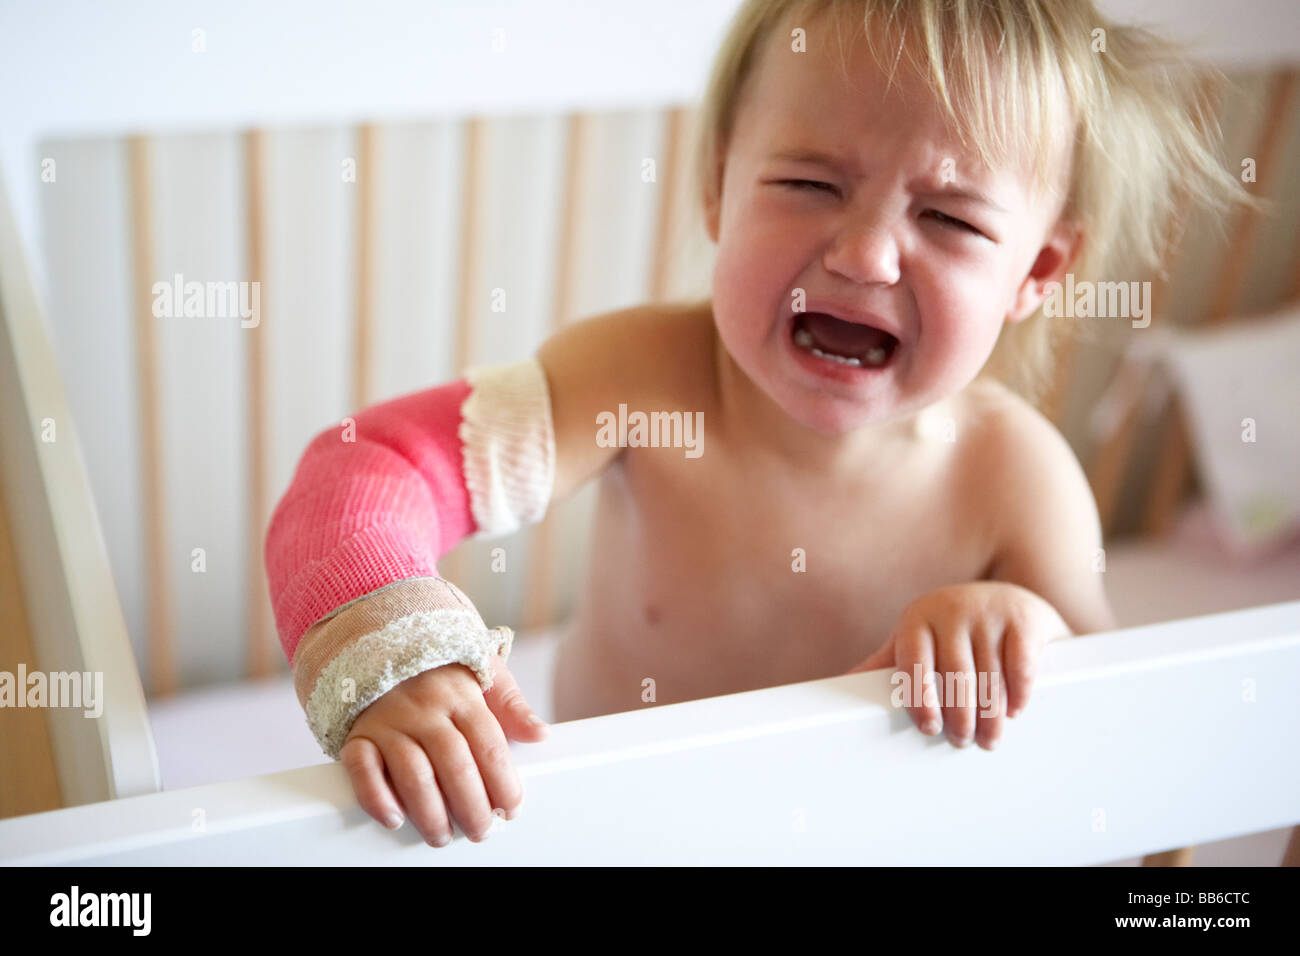 Crying Toddler With Arm In Cast Stock Photo